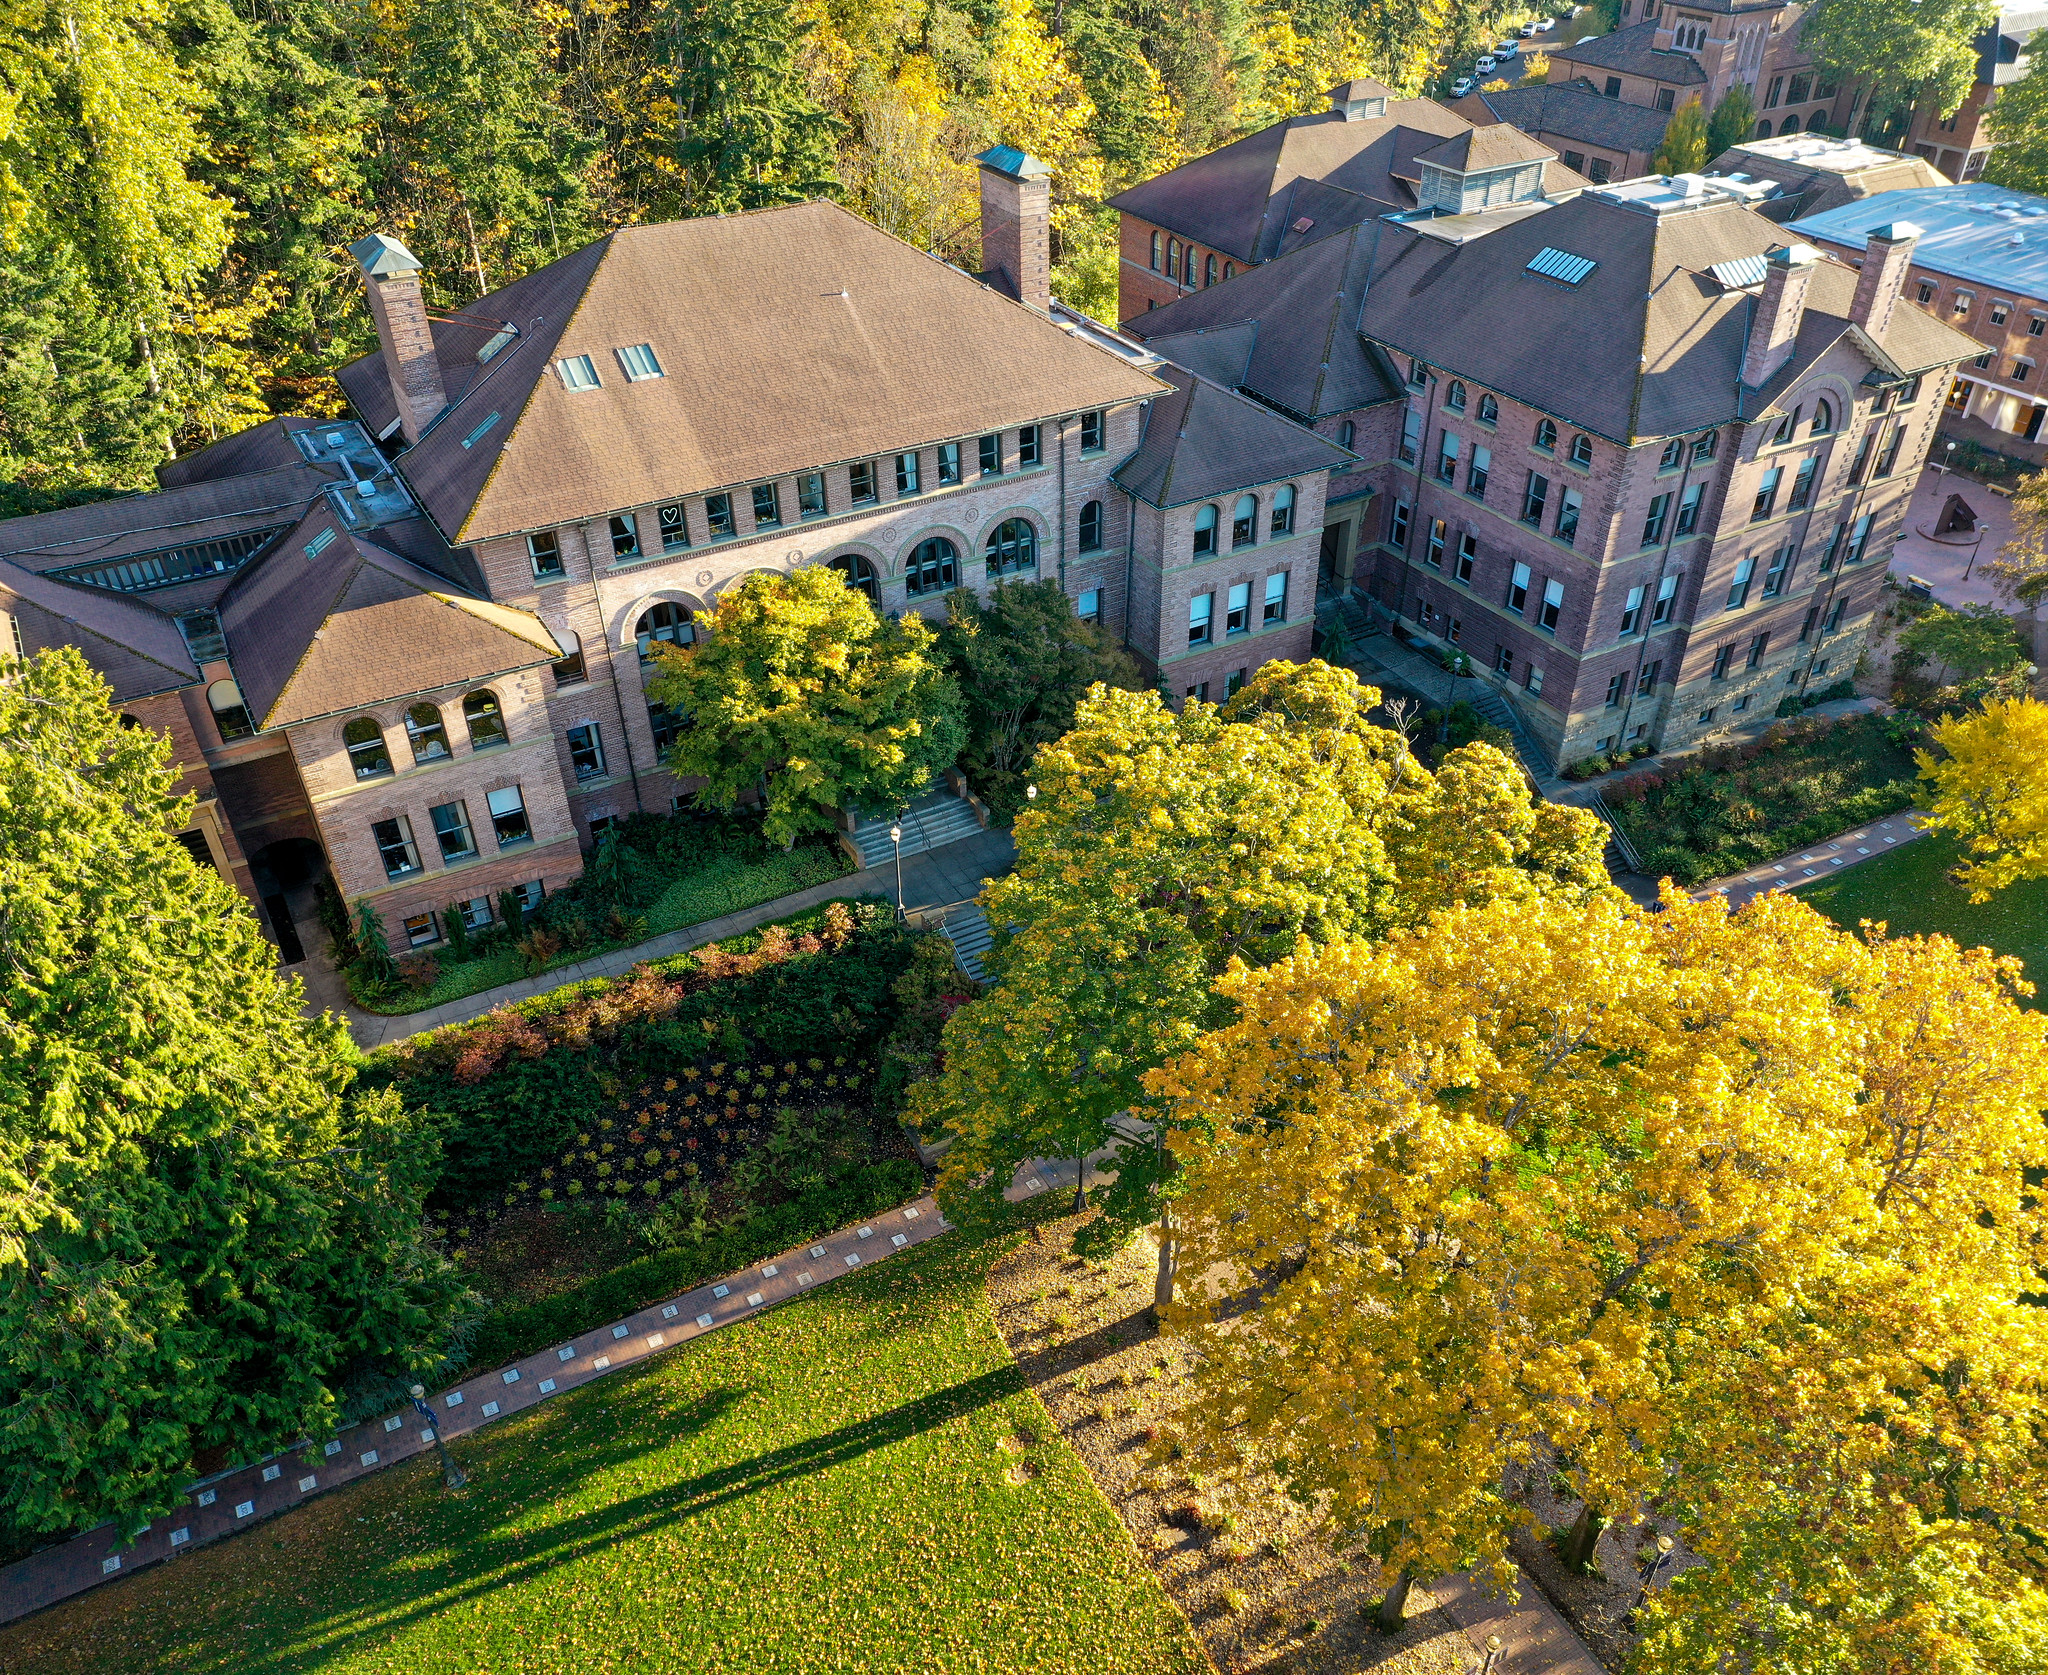 Aerial view of Old Main, a brick building, surrounded by colorful trees